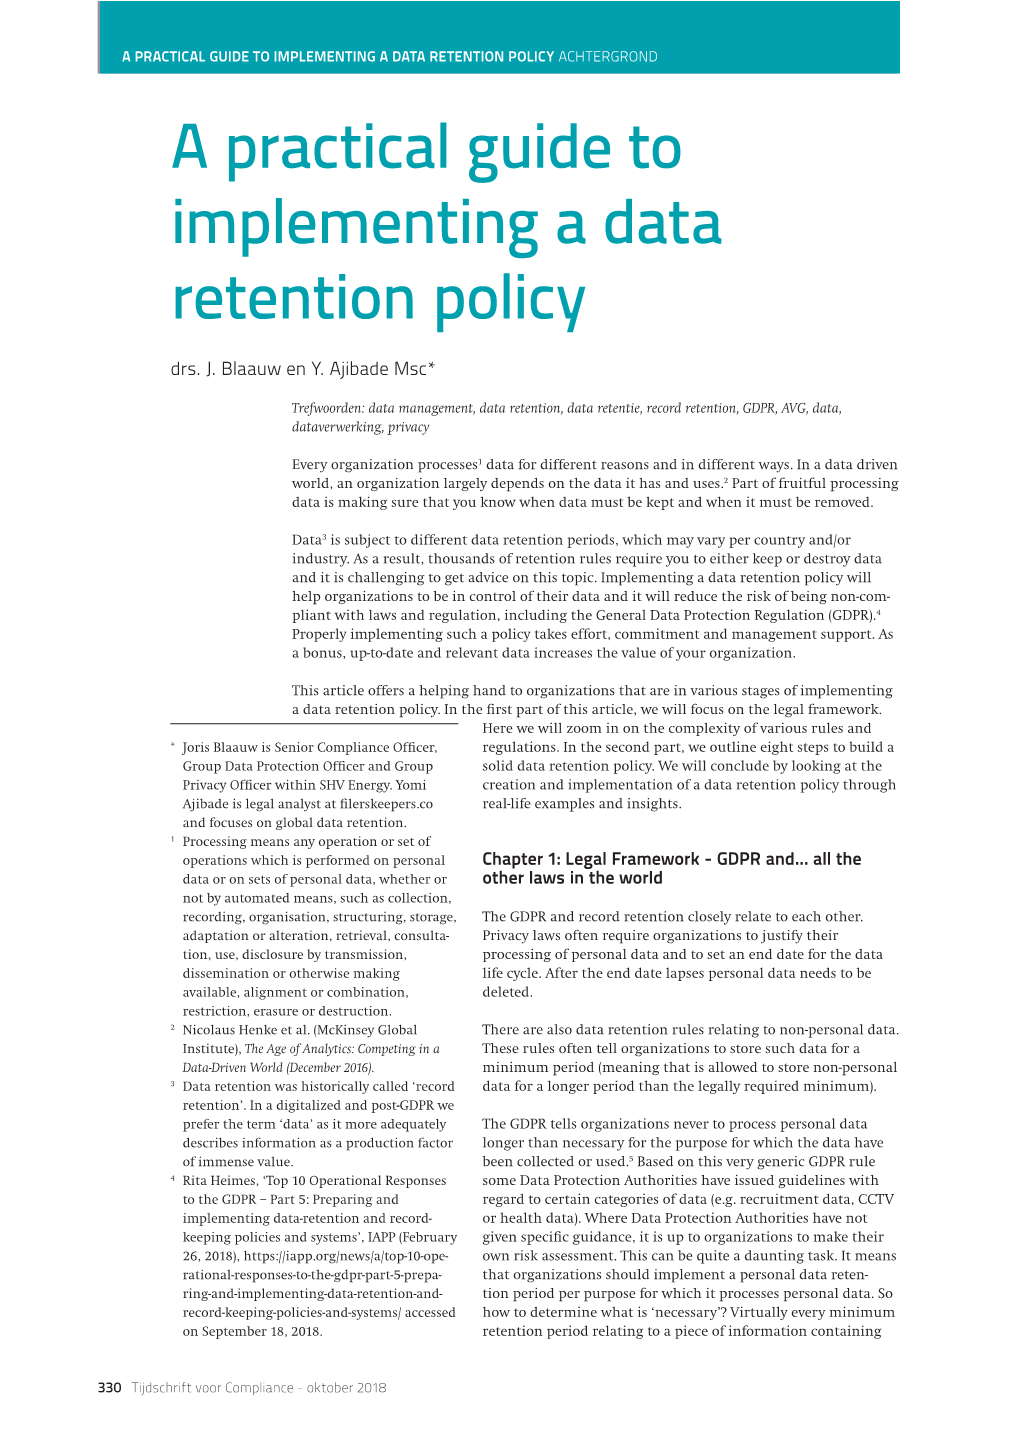 A Practical Guide to Implementing a Data Retention Policy